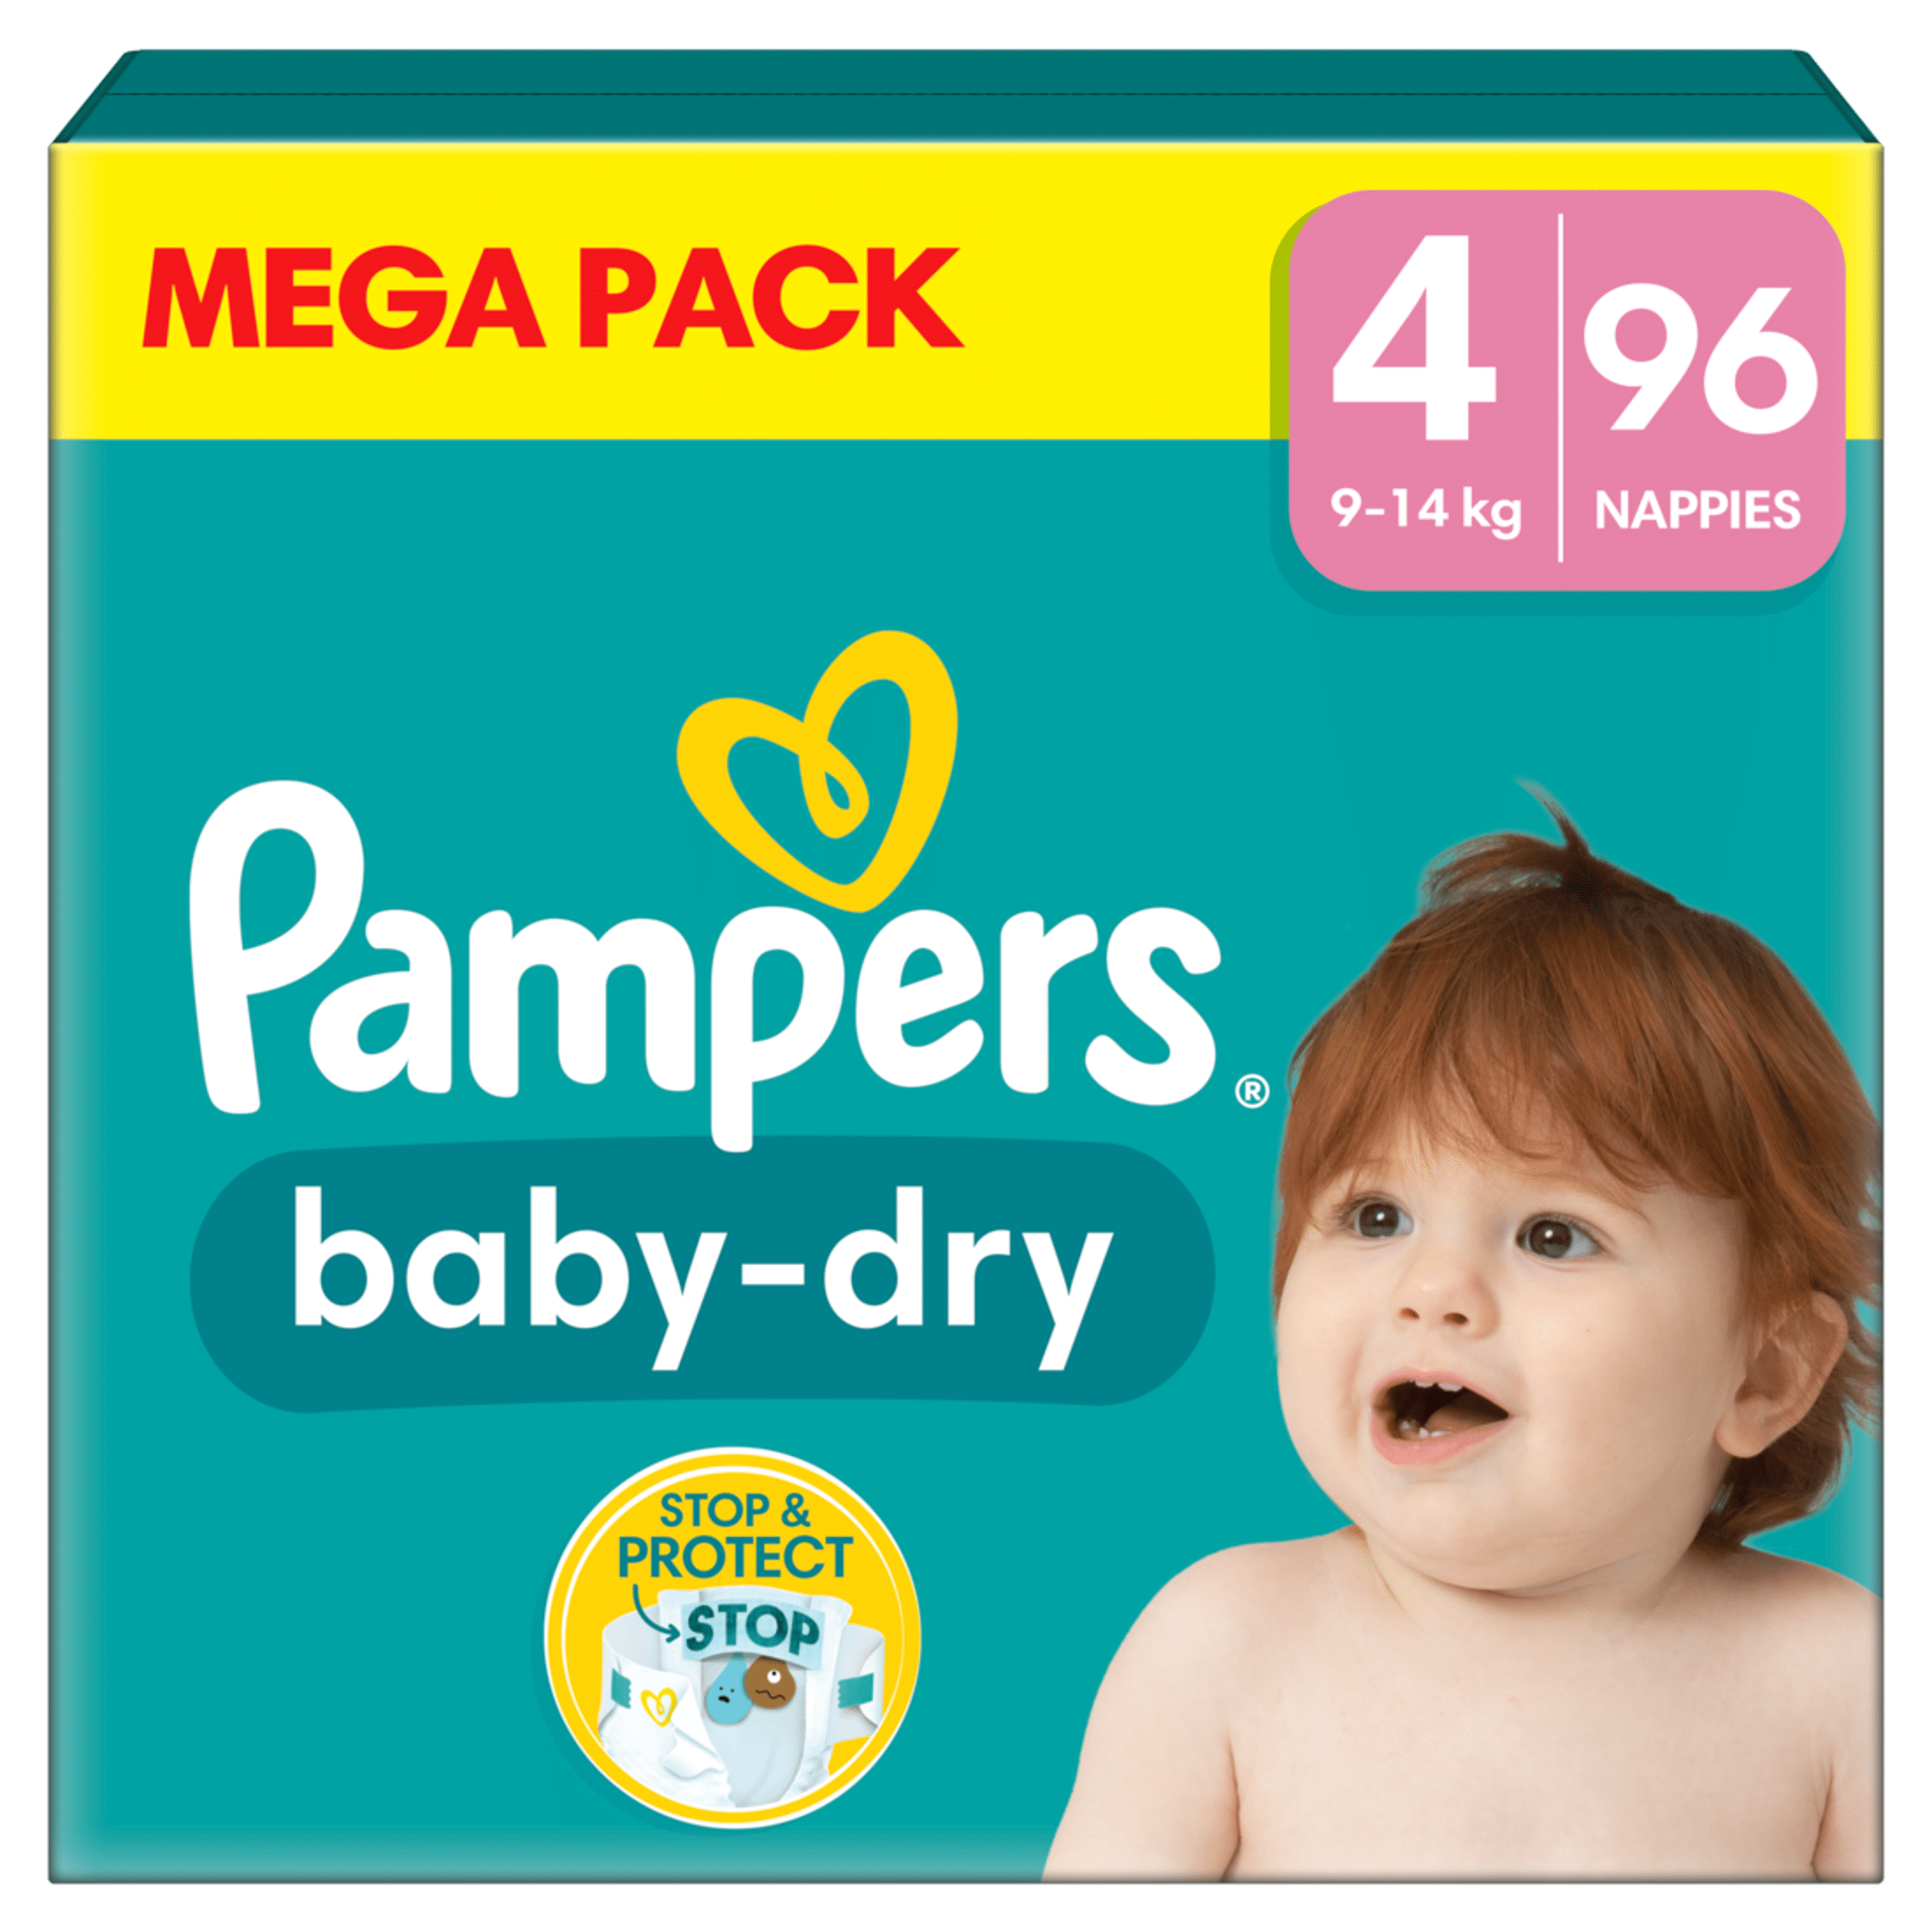 emag pampers care 4 204